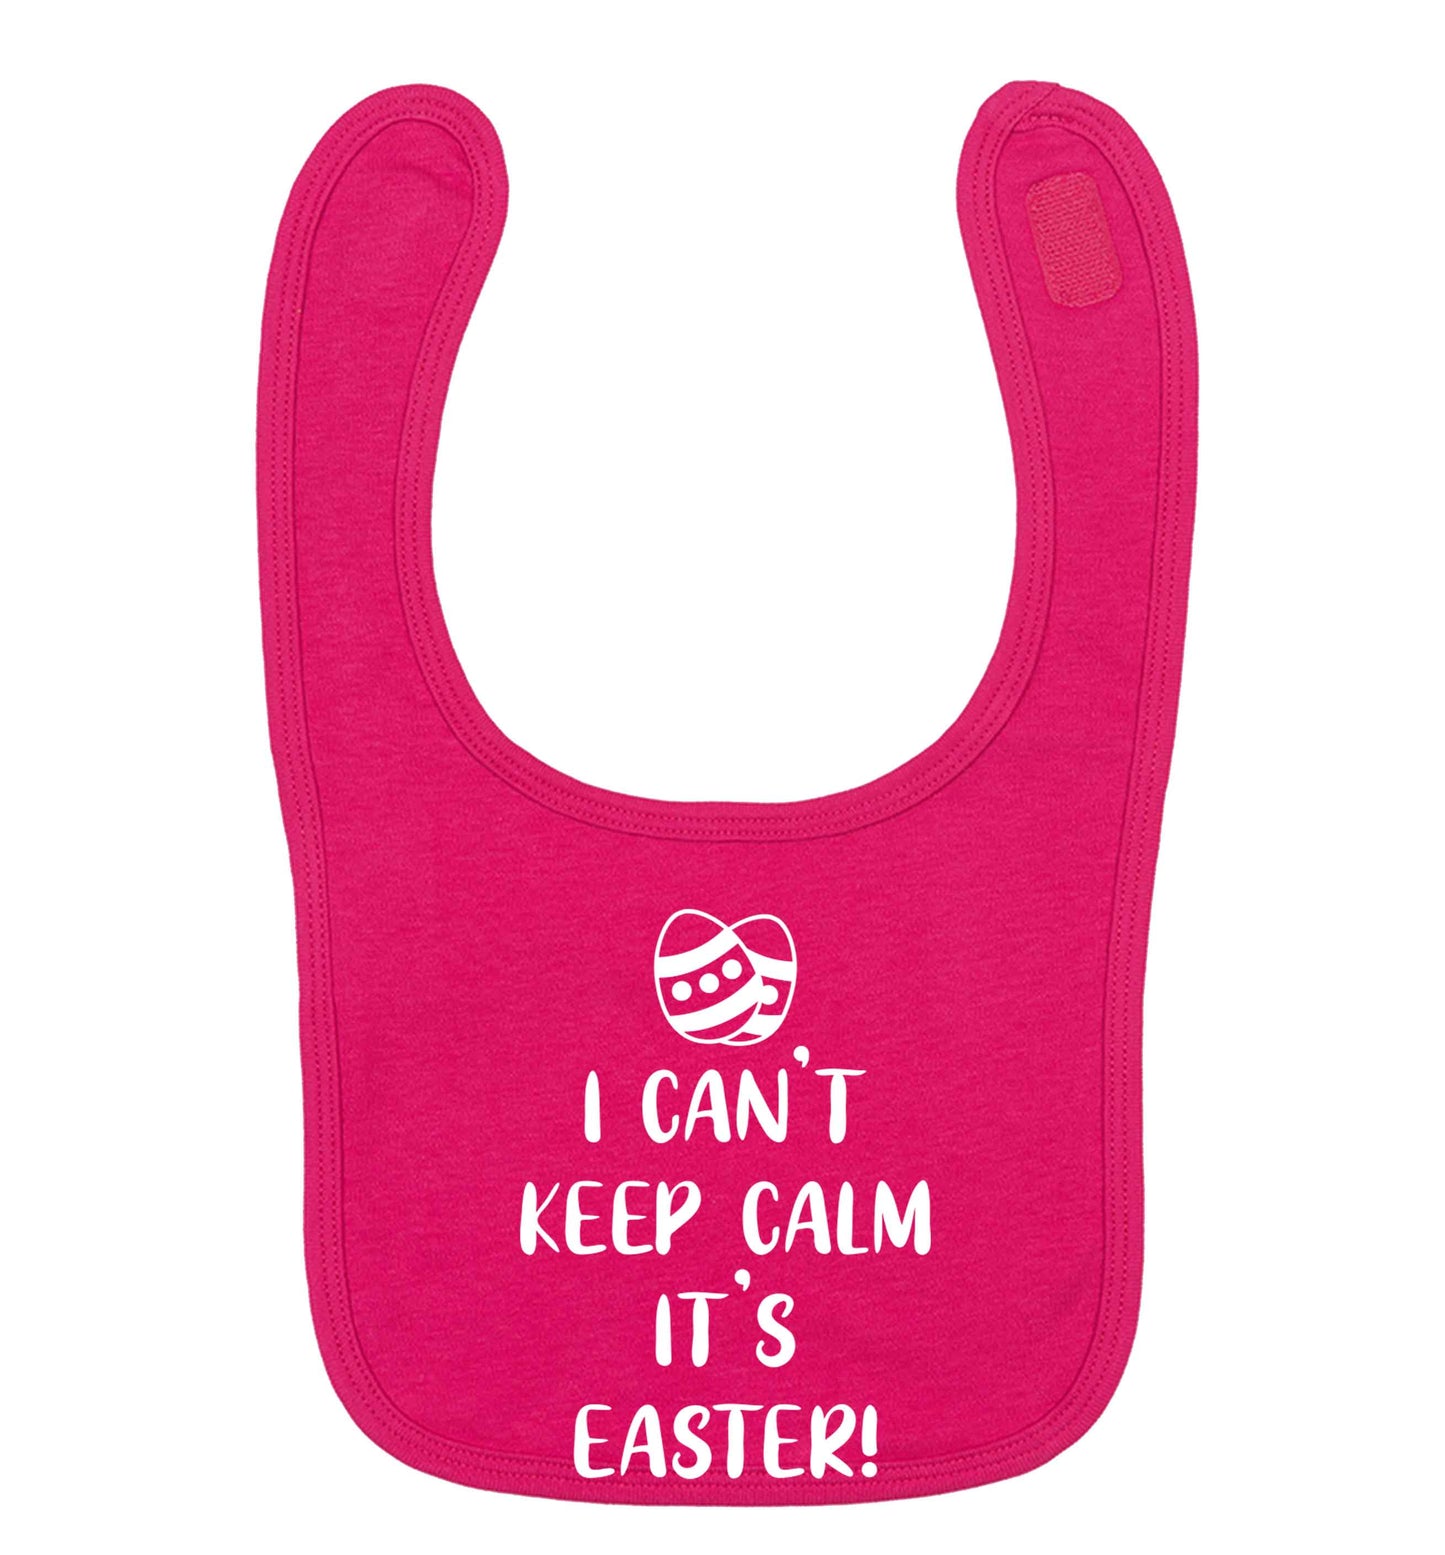 I can't keep calm it's Easter dark pink baby bib